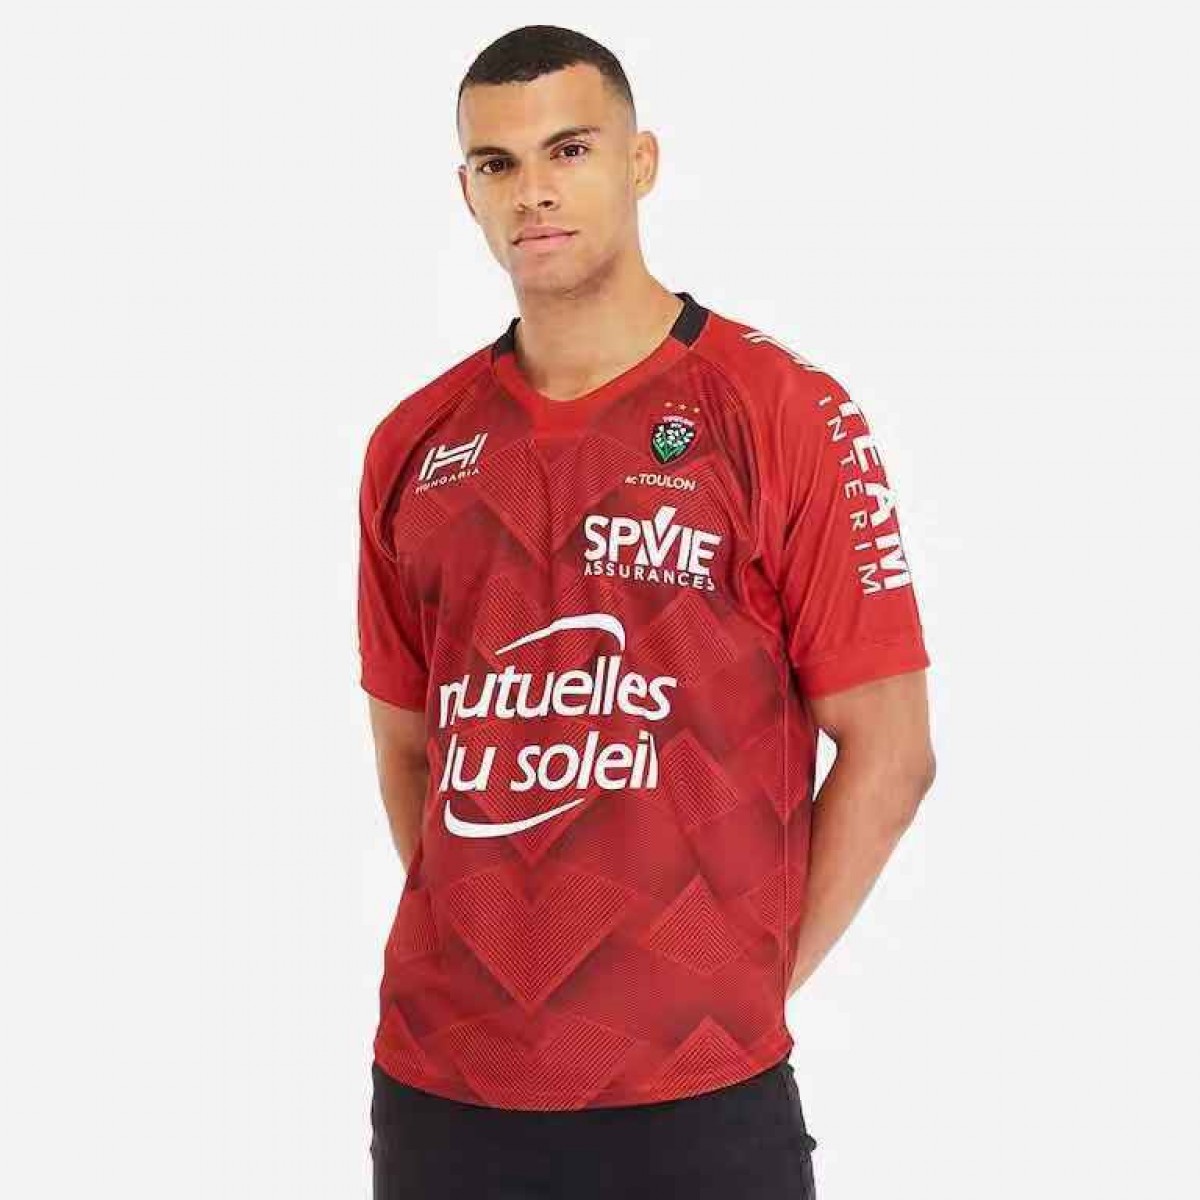 New 2019-20 Münster Home/Away Rugby Jerseys Rugby Union Football Shirt 